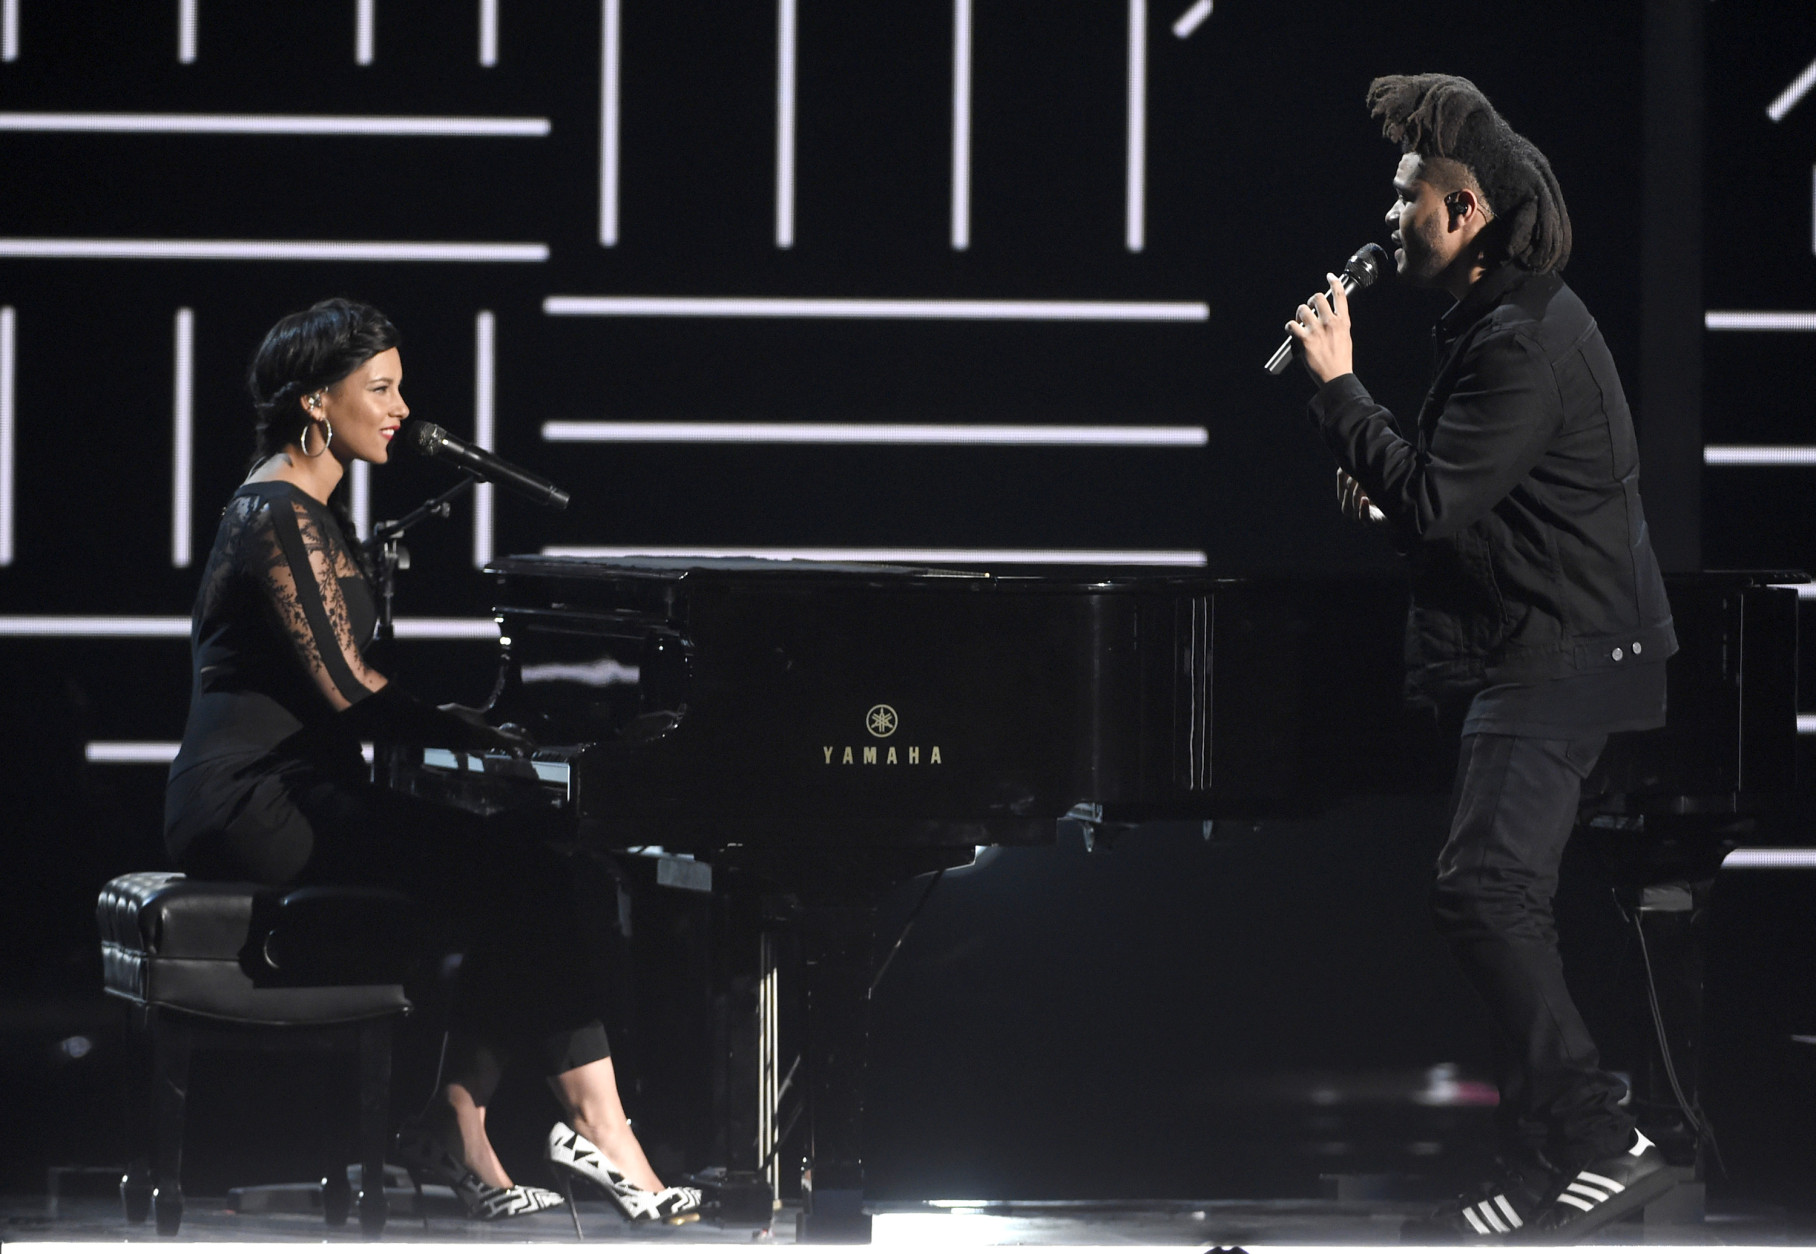 Alicia Keys, left, and The Weeknd perform at the BET Awards at the Microsoft Theater on Sunday, June 28, 2015, in Los Angeles. (Photo by Chris Pizzello/Invision/AP)